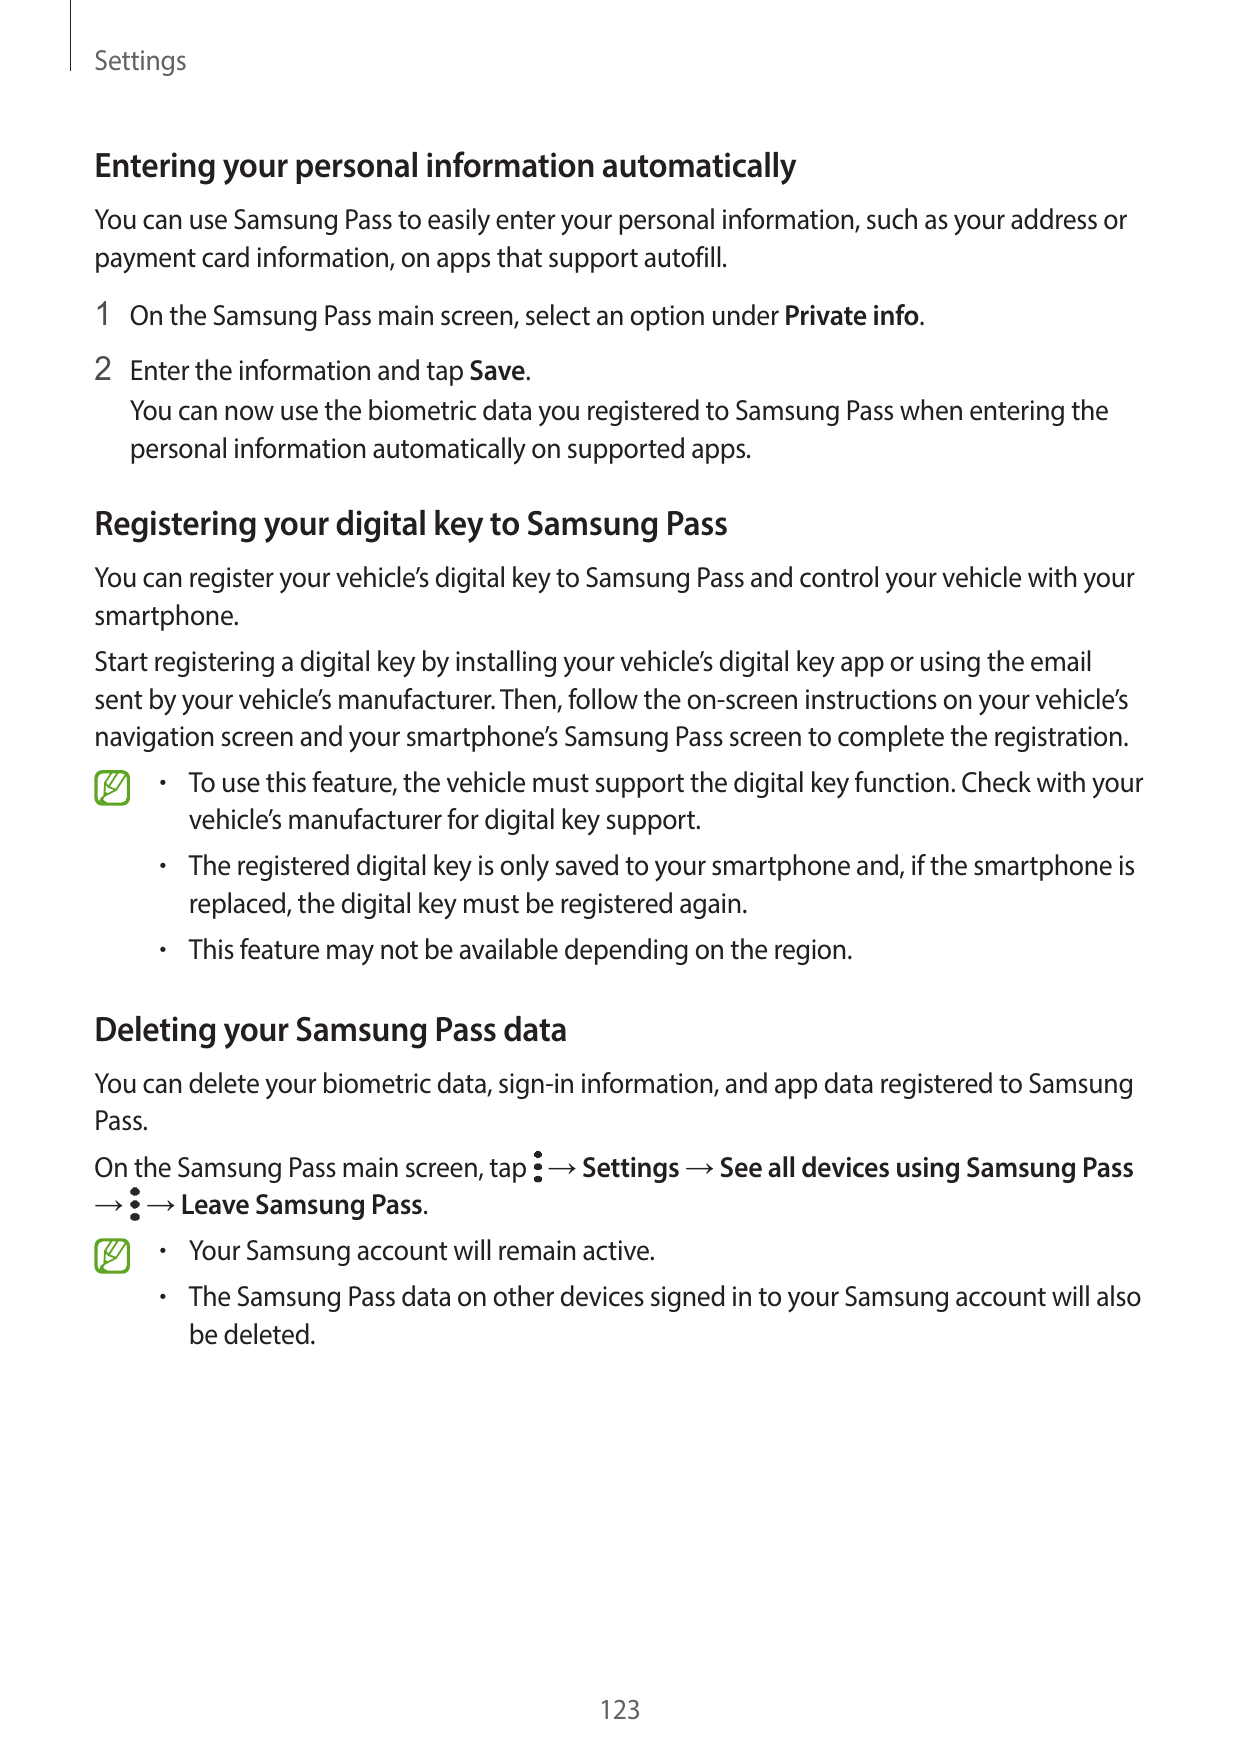 SettingsEntering your personal information automaticallyYou can use Samsung Pass to easily enter your personal information, such